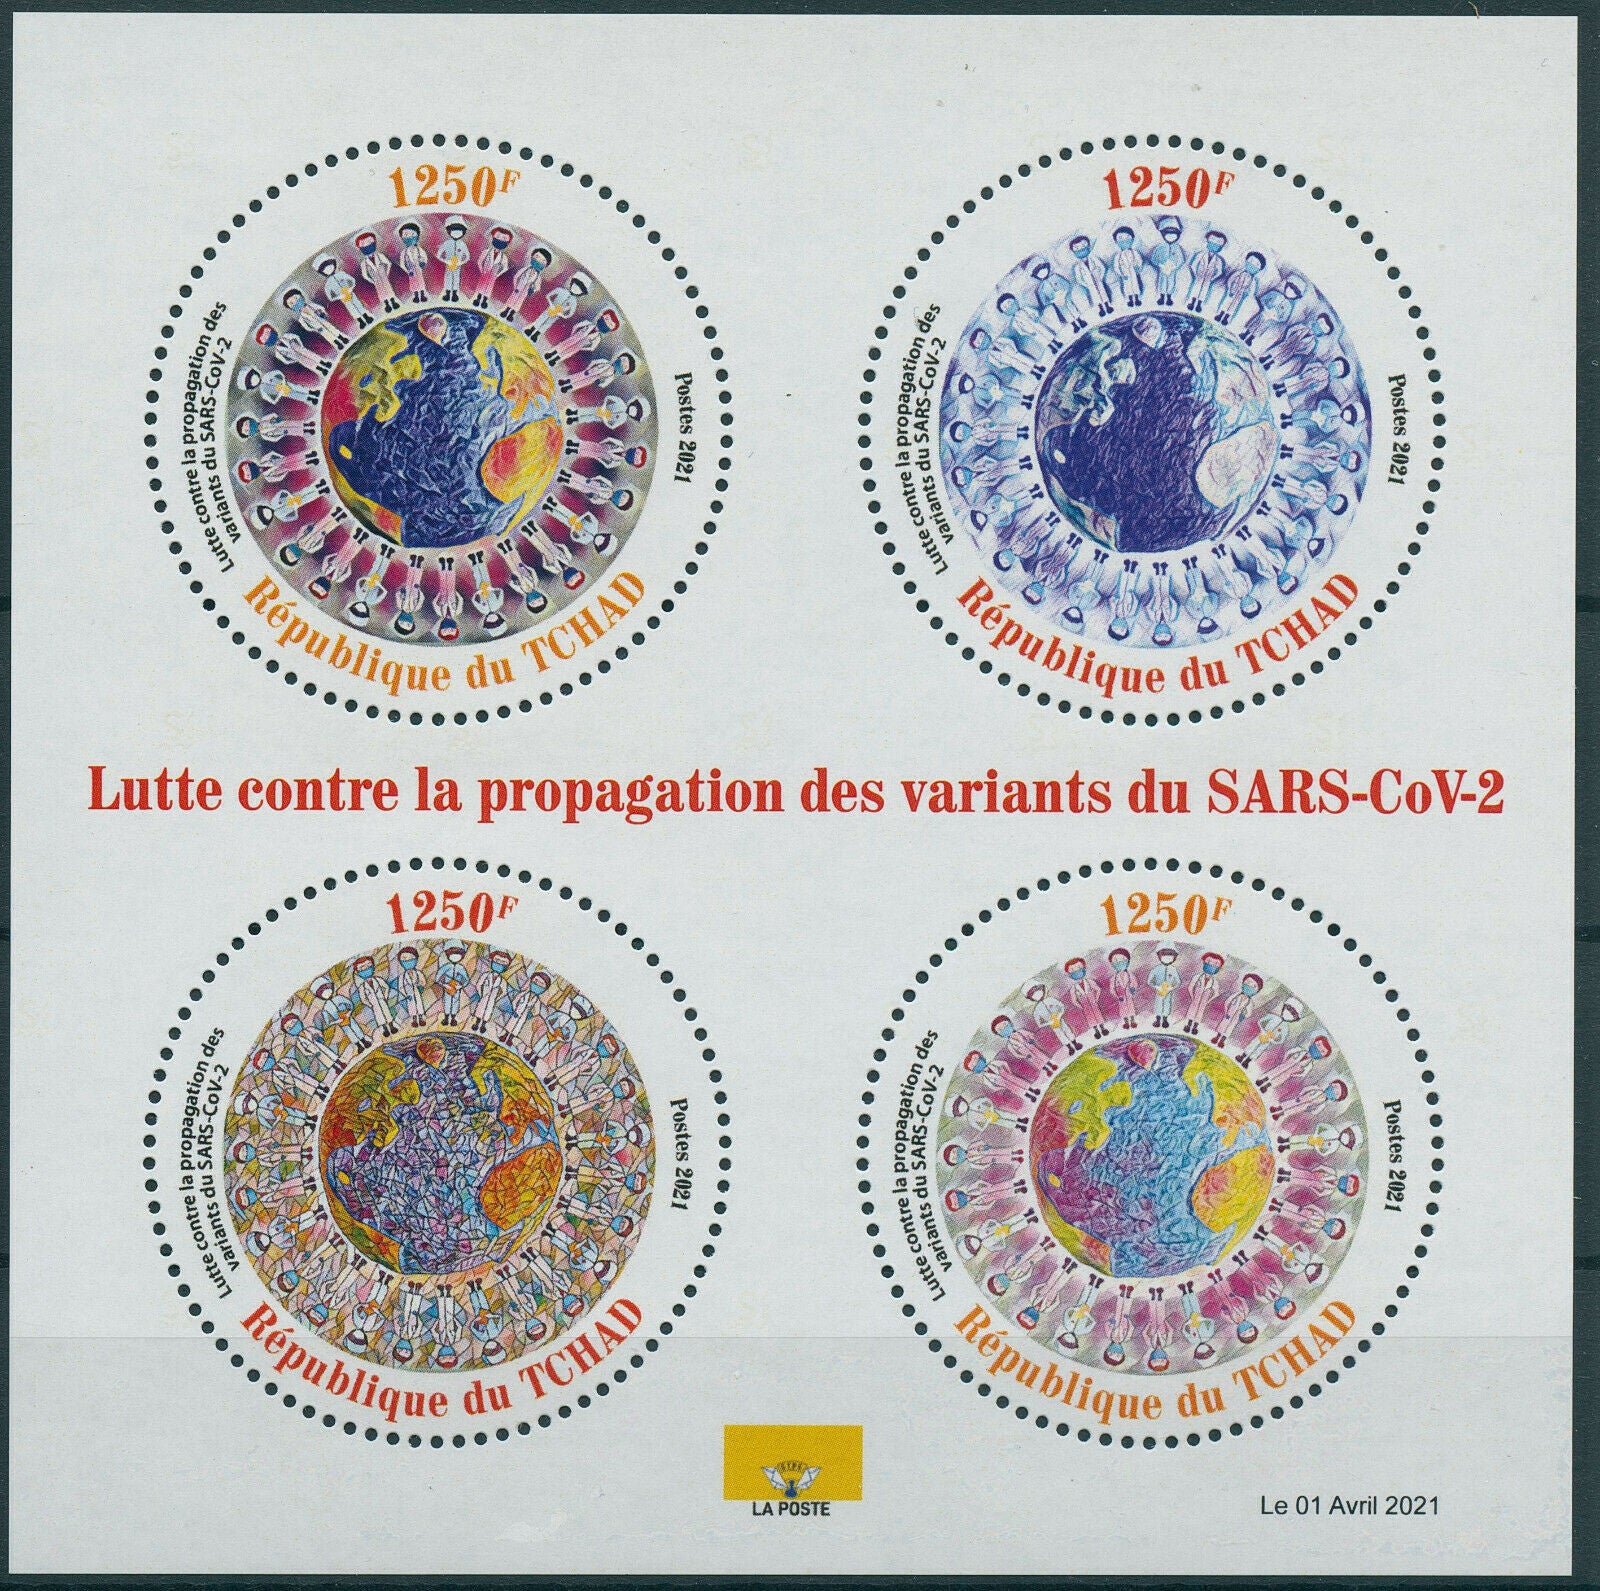 Chad 2021 MNH Medical Stamps Corona Fight Against SARS-Cov-2 Variants Covid-19 Covid 4v M/S